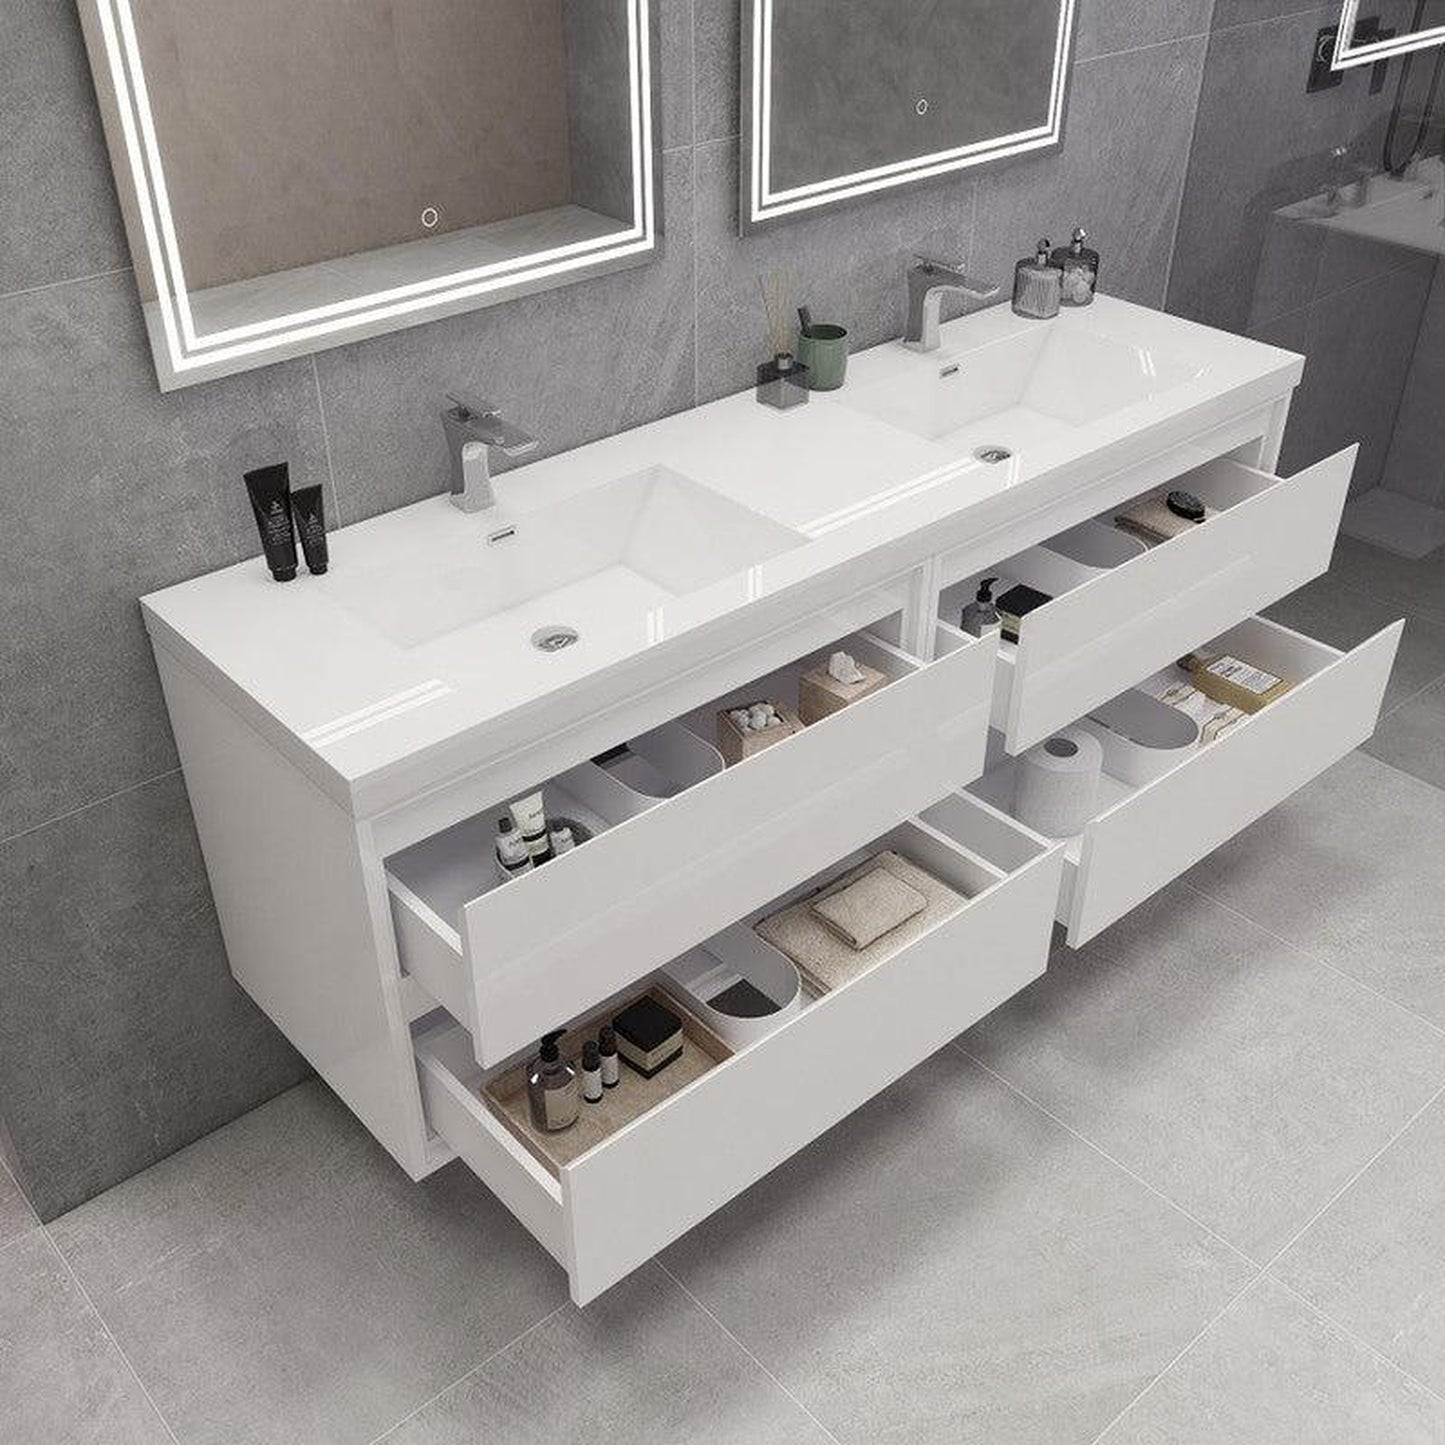 Moreno Bath Sage 84" High Gloss White Wall-Mounted Modern Vanity With Double Reinforced White Acrylic Sinks